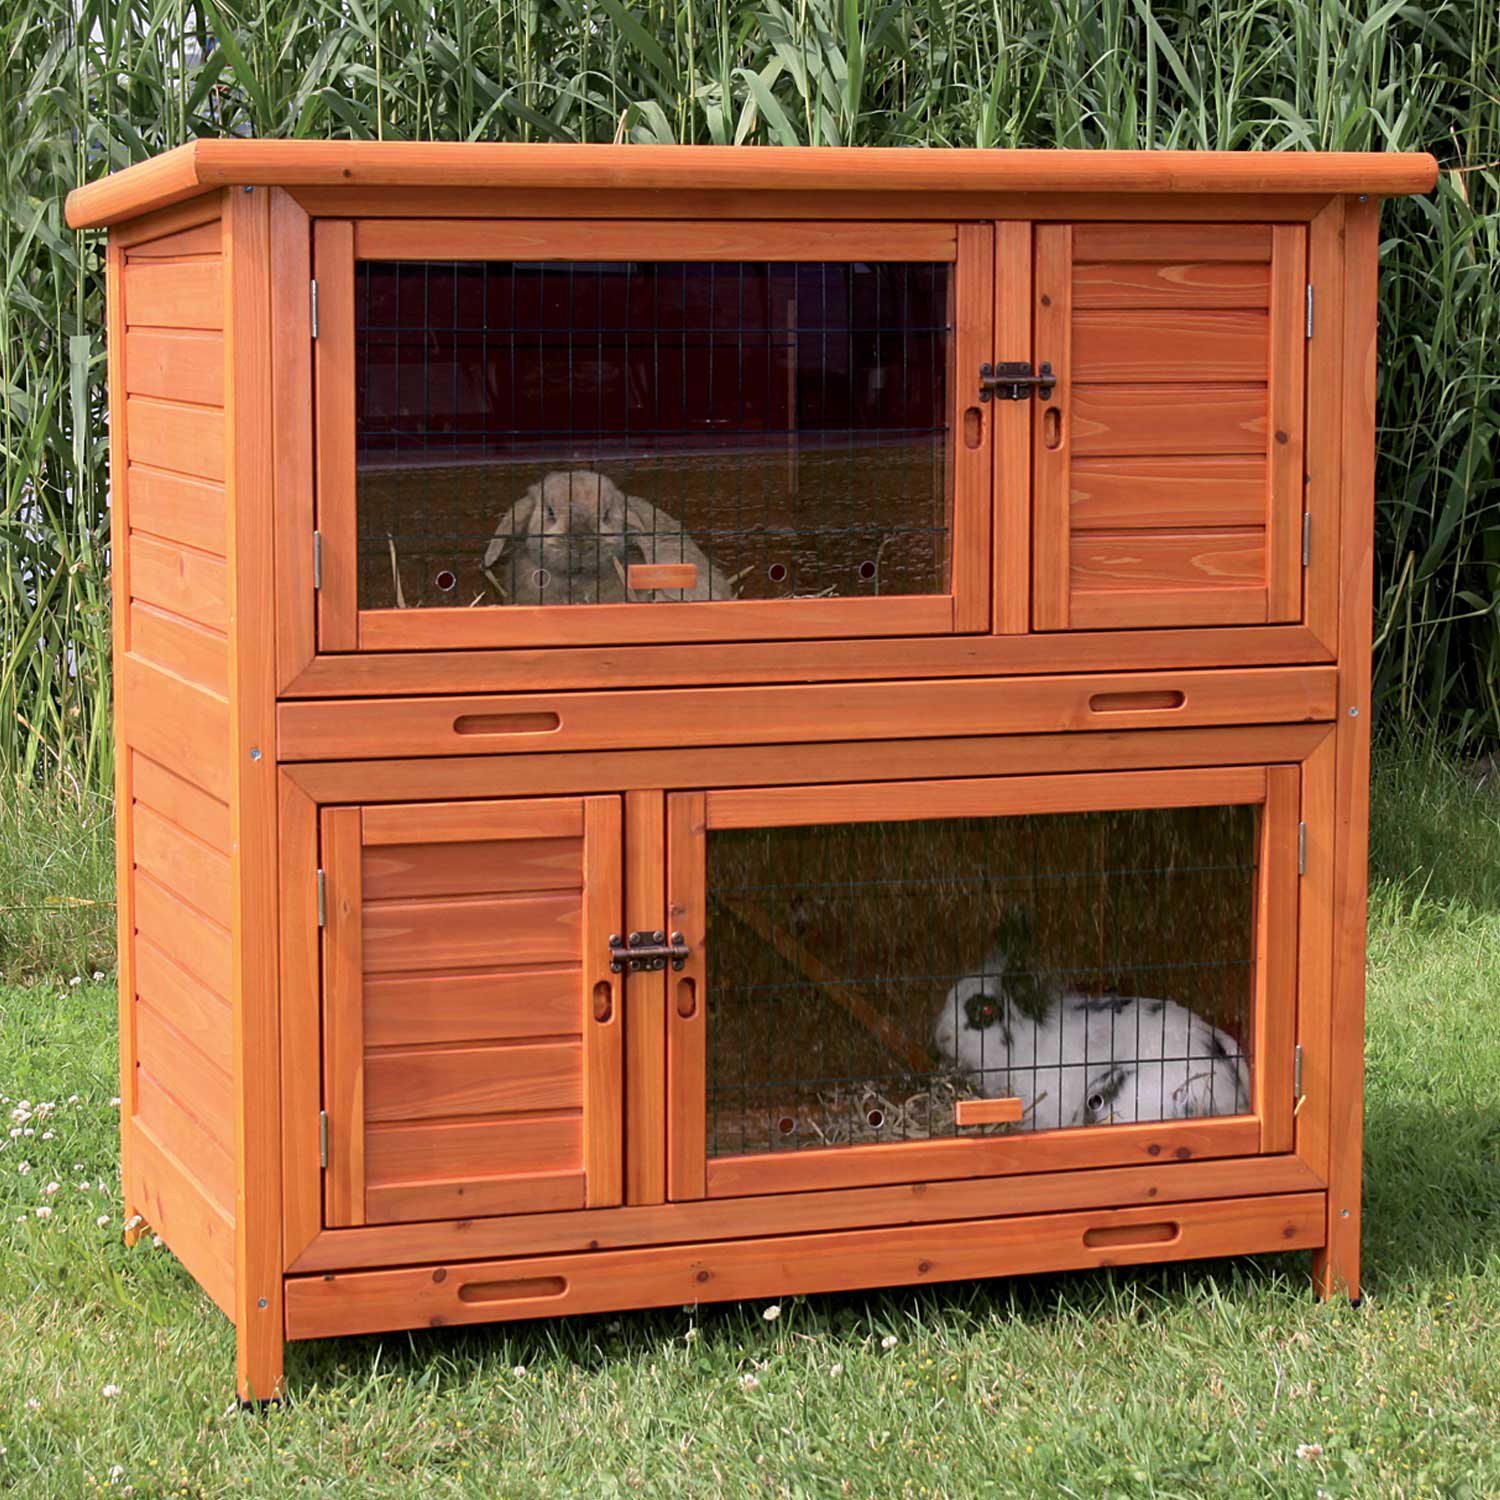 TRIXIE Natura Insulated Two Story Rabbit Hutch